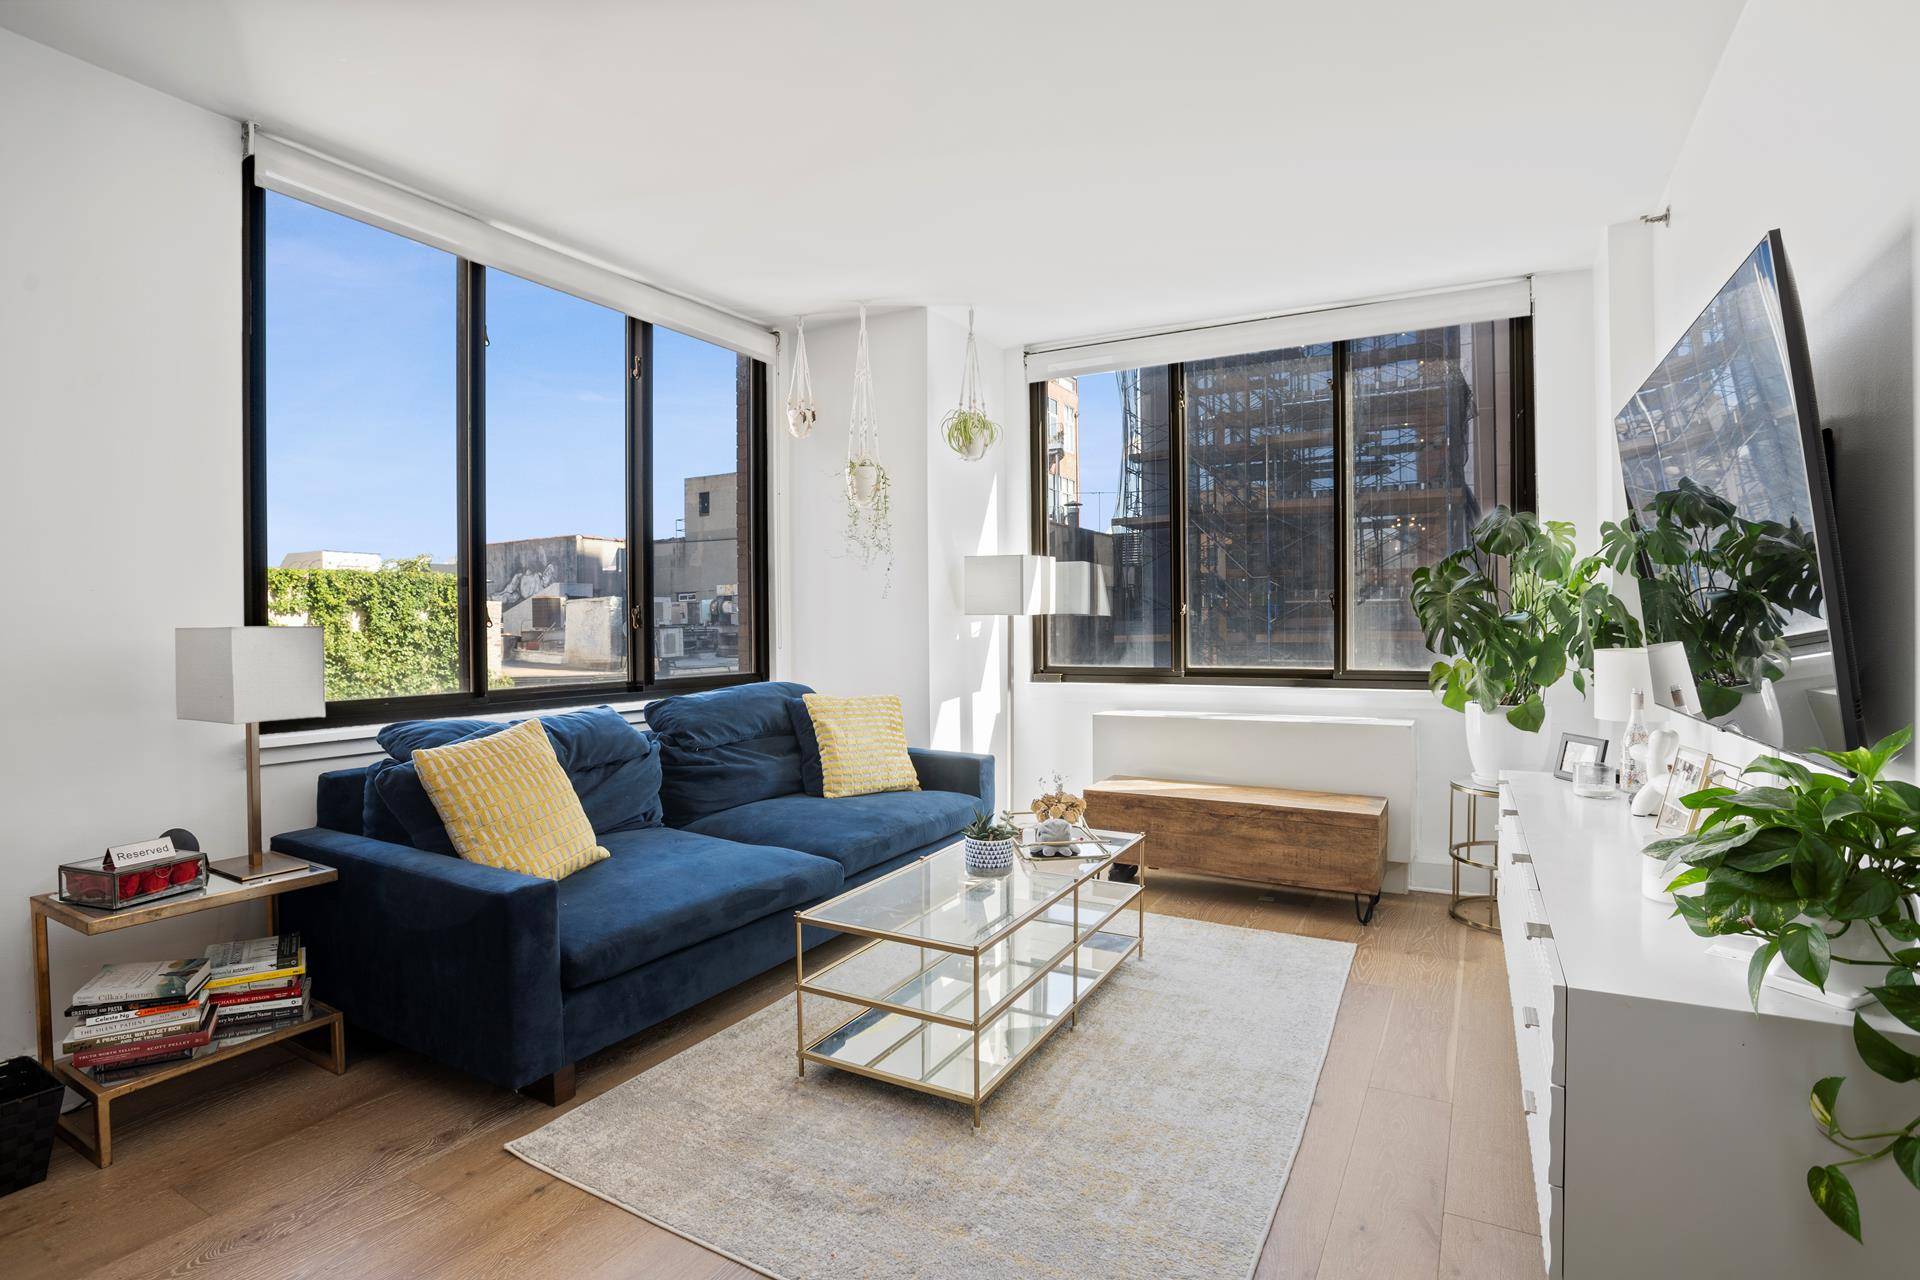 Located in the heart of Nolita, where the Bowery meets Spring Street, this corner one bed, one bath condo boasts sunny Northern and Eastern exposures.